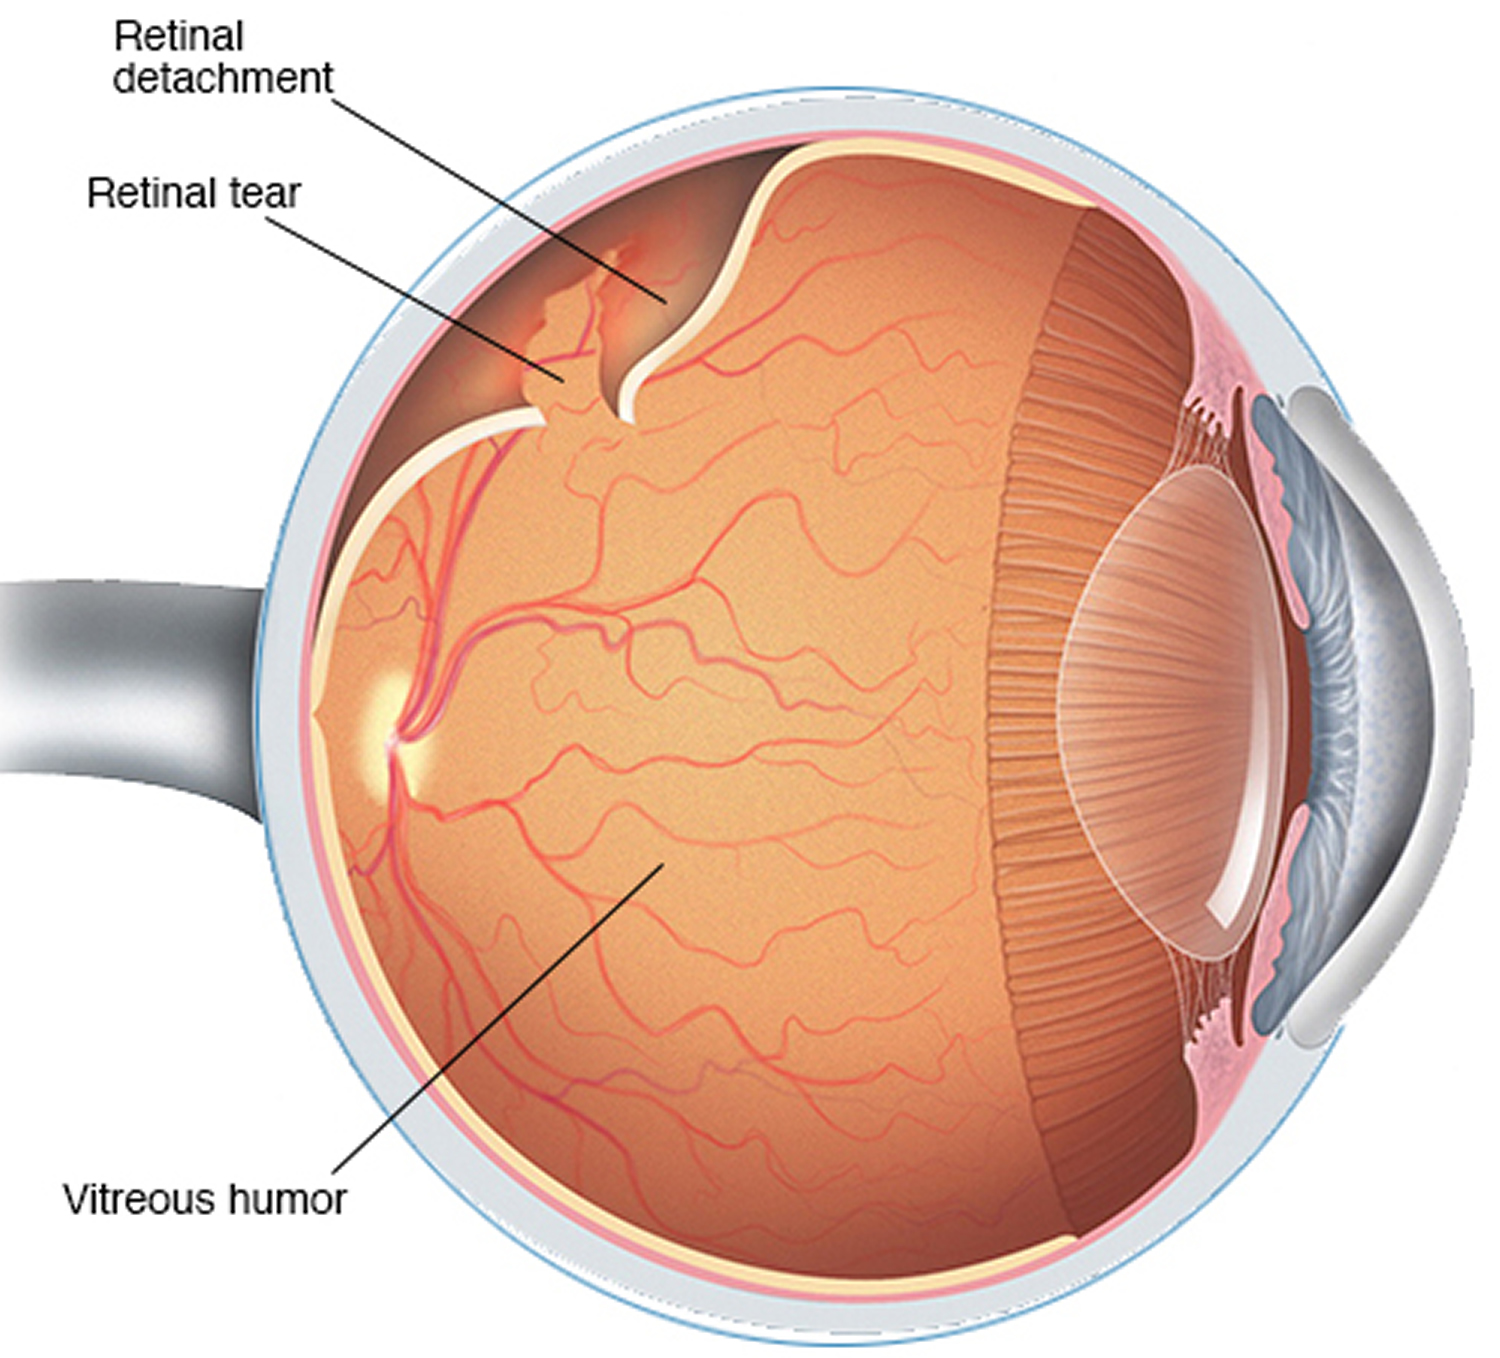 hole in retina without detachment